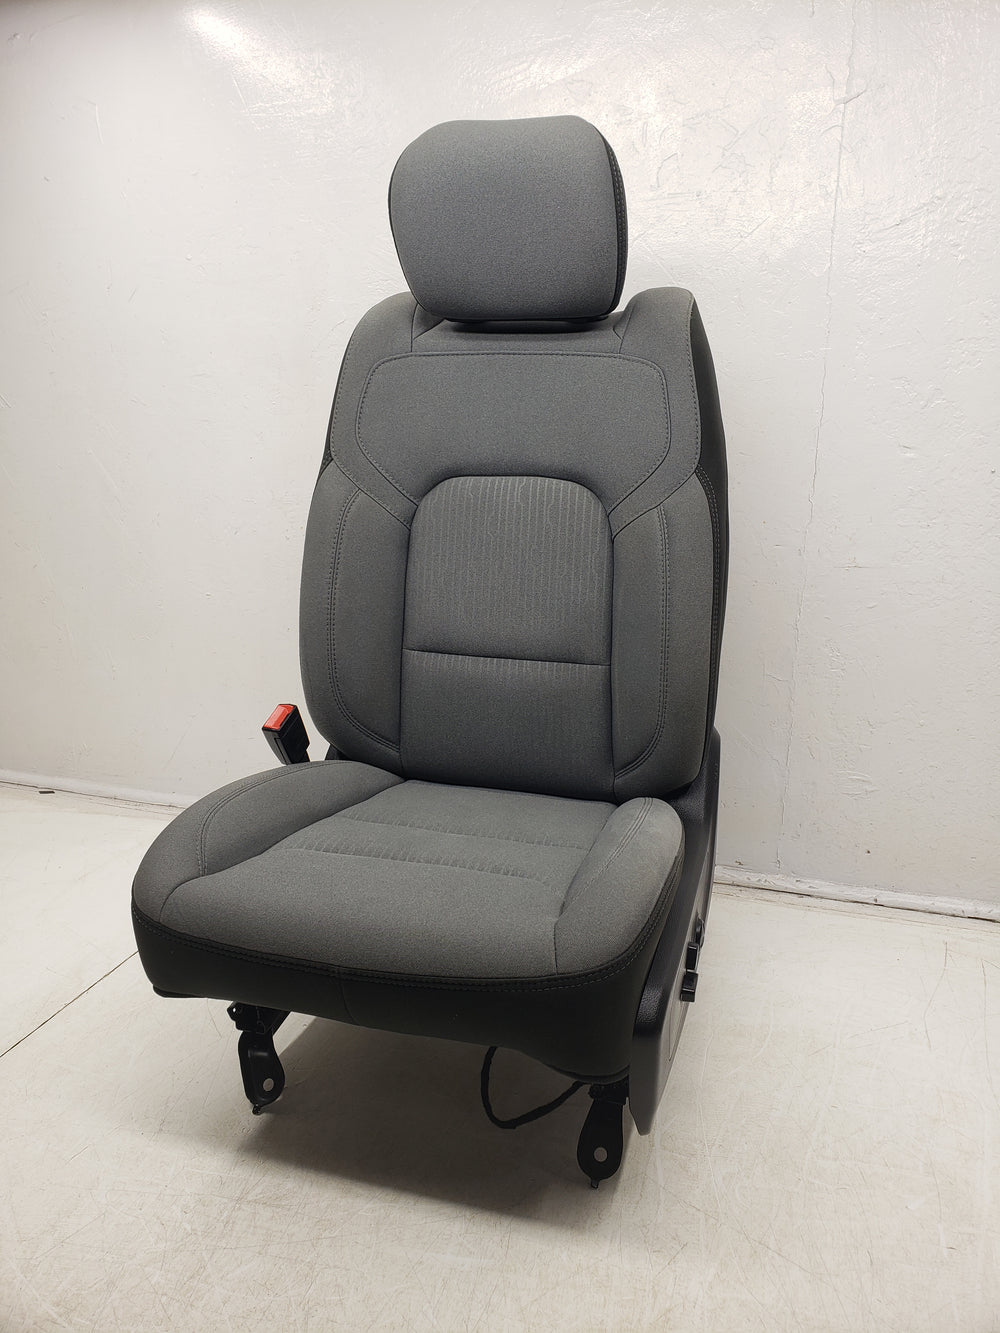 2019 - 2024 Dodge Ram Powered Driver Seat, Light Gray Cloth, 1500 DT #1452 | Picture # 3 | OEM Seats